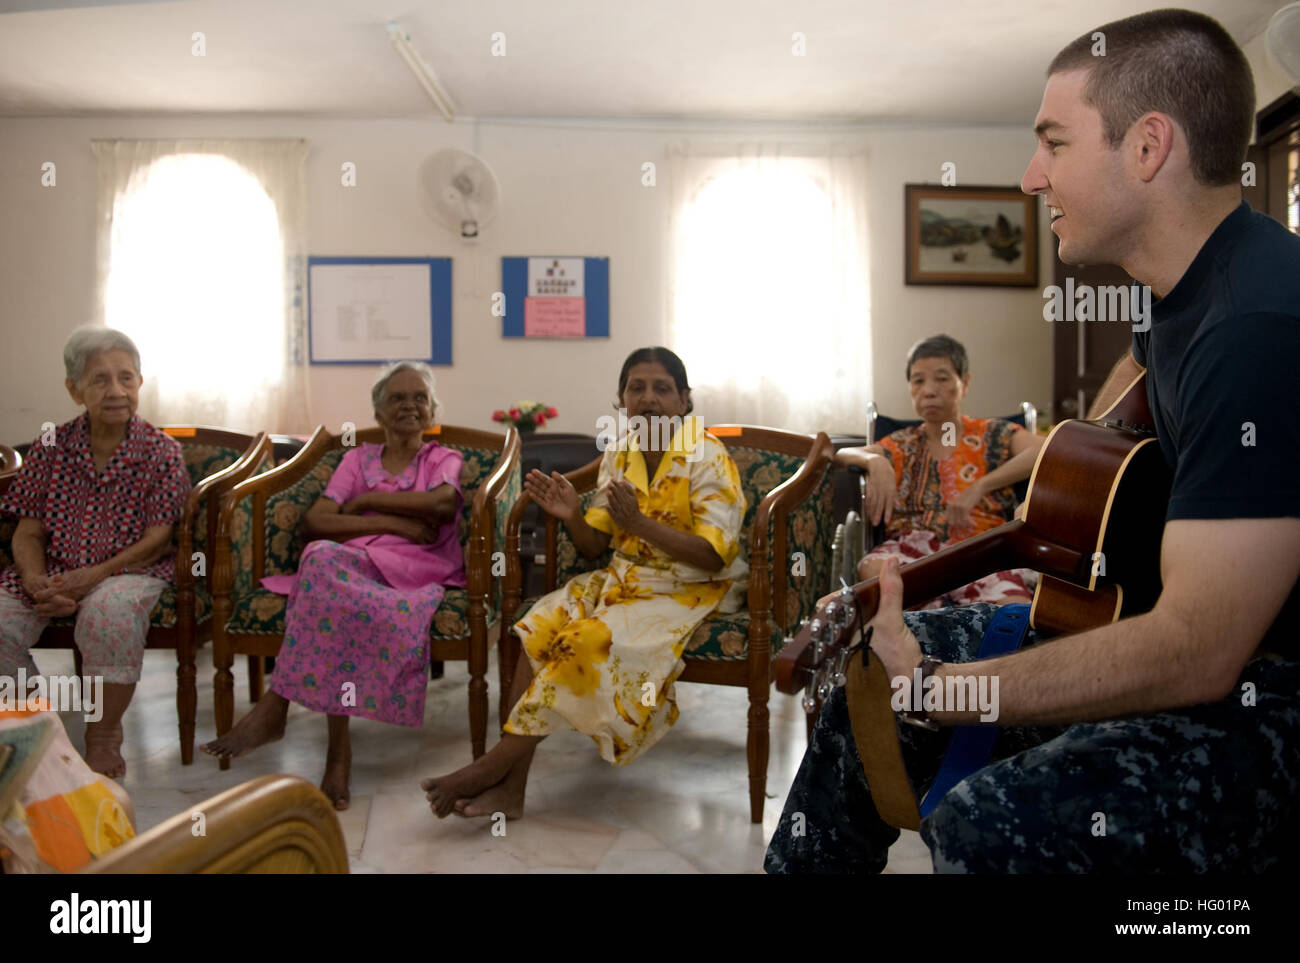 110907-N-JI215-048 KLANG, Malaysia (Sept. 7, 2011) Lt. Paul Oyler, from Paso Robles, Calif., performs worship songs for senior citizens at the Shekinah Senior Citizens Home in Klang, Malaysia, during a community service event. The John C. Stennis Carrier Strike Group is in Malaysia as part of a scheduled port visit during a deployment to the western Pacific Ocean and Arabian Gulf.  (U.S. Navy photo by Mass Communication Specialist 3rd Class Timothy Aguirre/Released) US Navy 110907-N-JI215-048 Lt. Paul Oyler performs worship songs for senior citizens at the Shekinah Senior Citizens Home in Klan Stock Photo